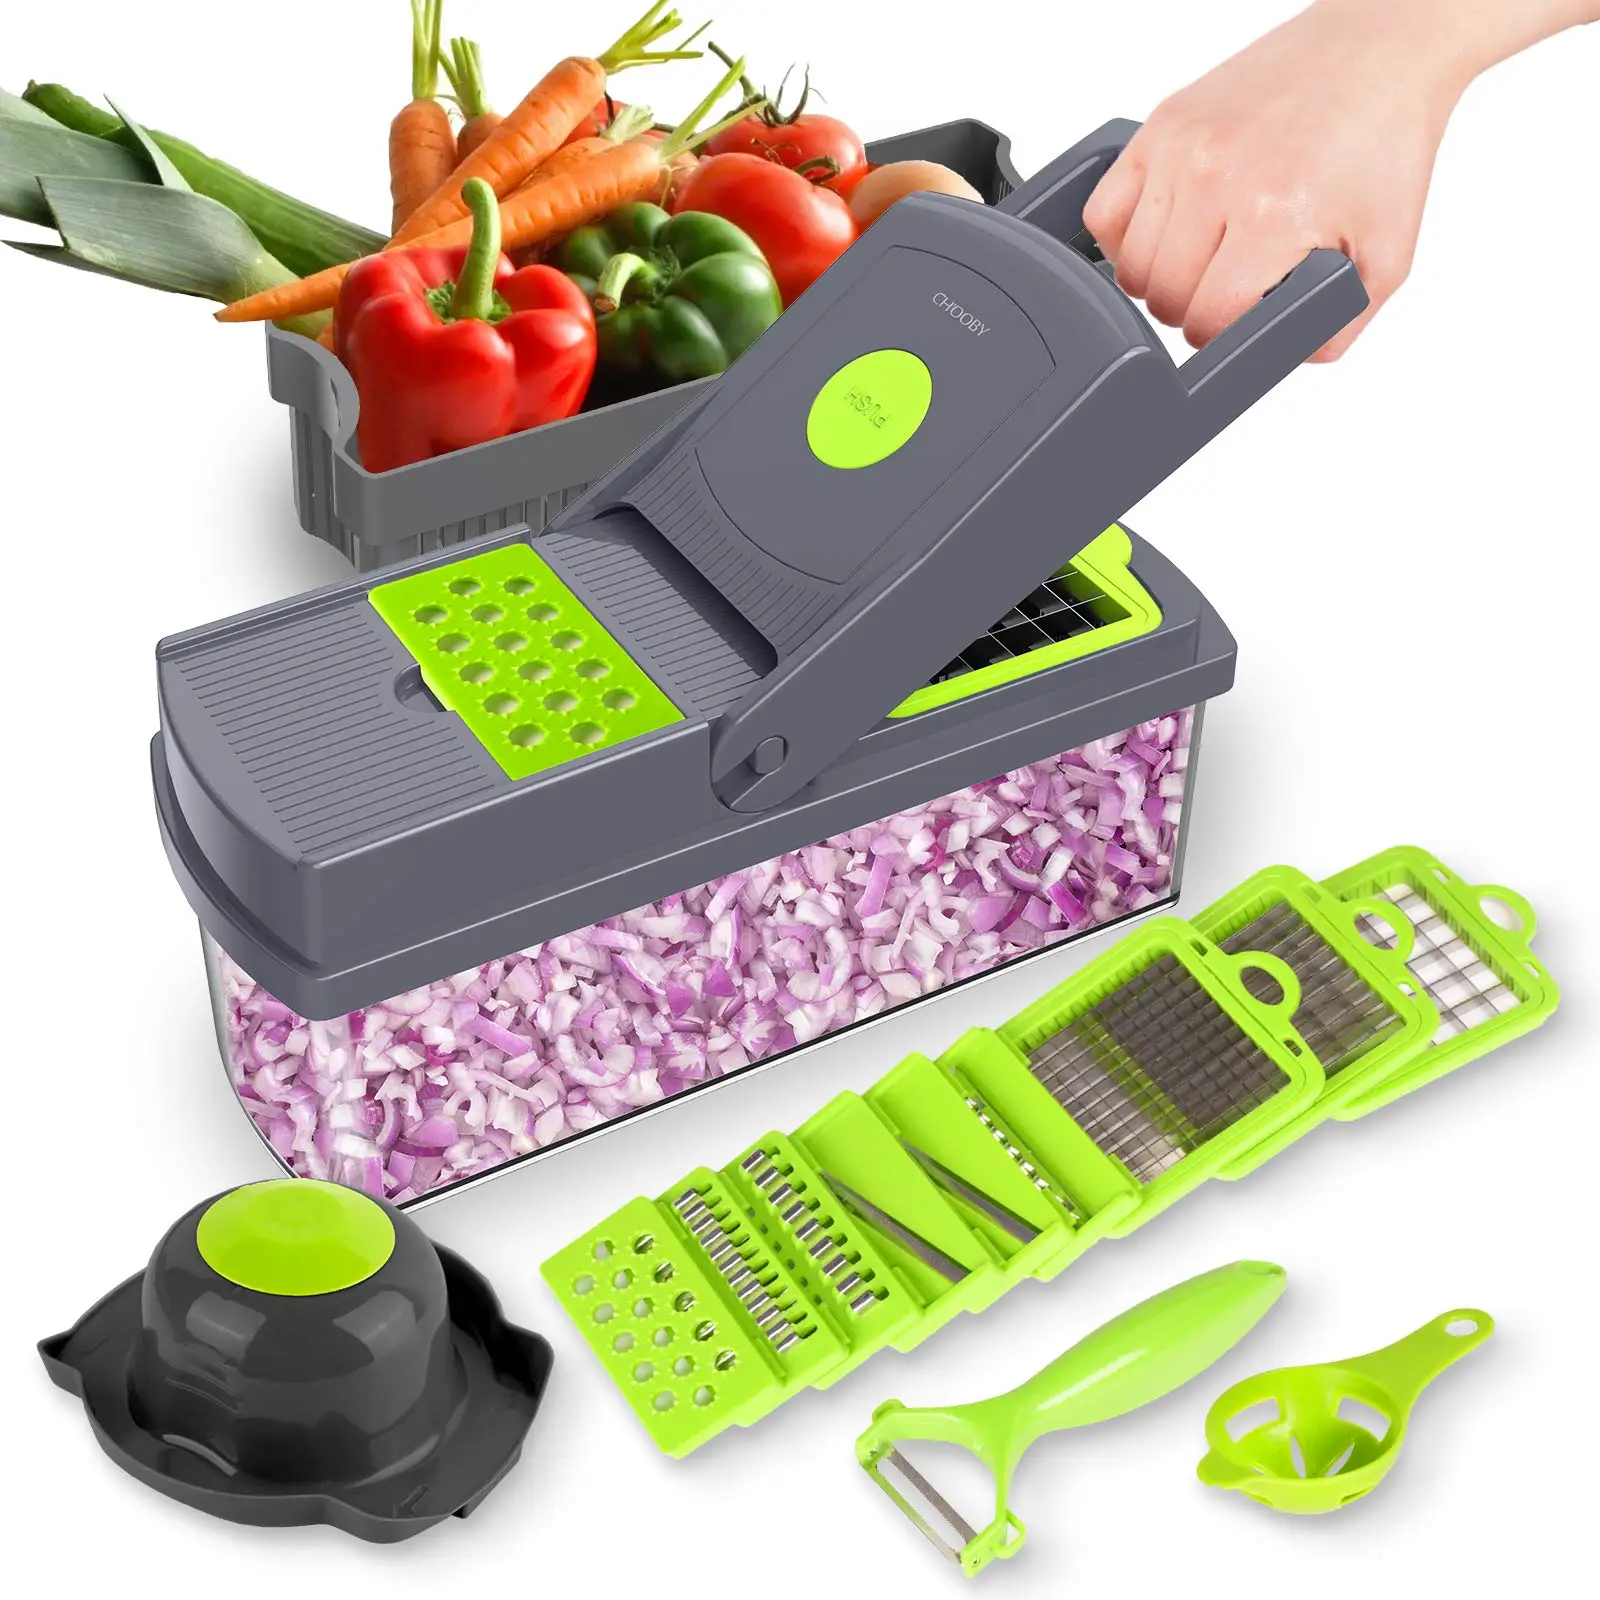 

14 in1 Multifunctional Veggie Slicer Dicer Peeler Cutter Grater Potato Onion Salad Fruit Vegetable Chopper with Container